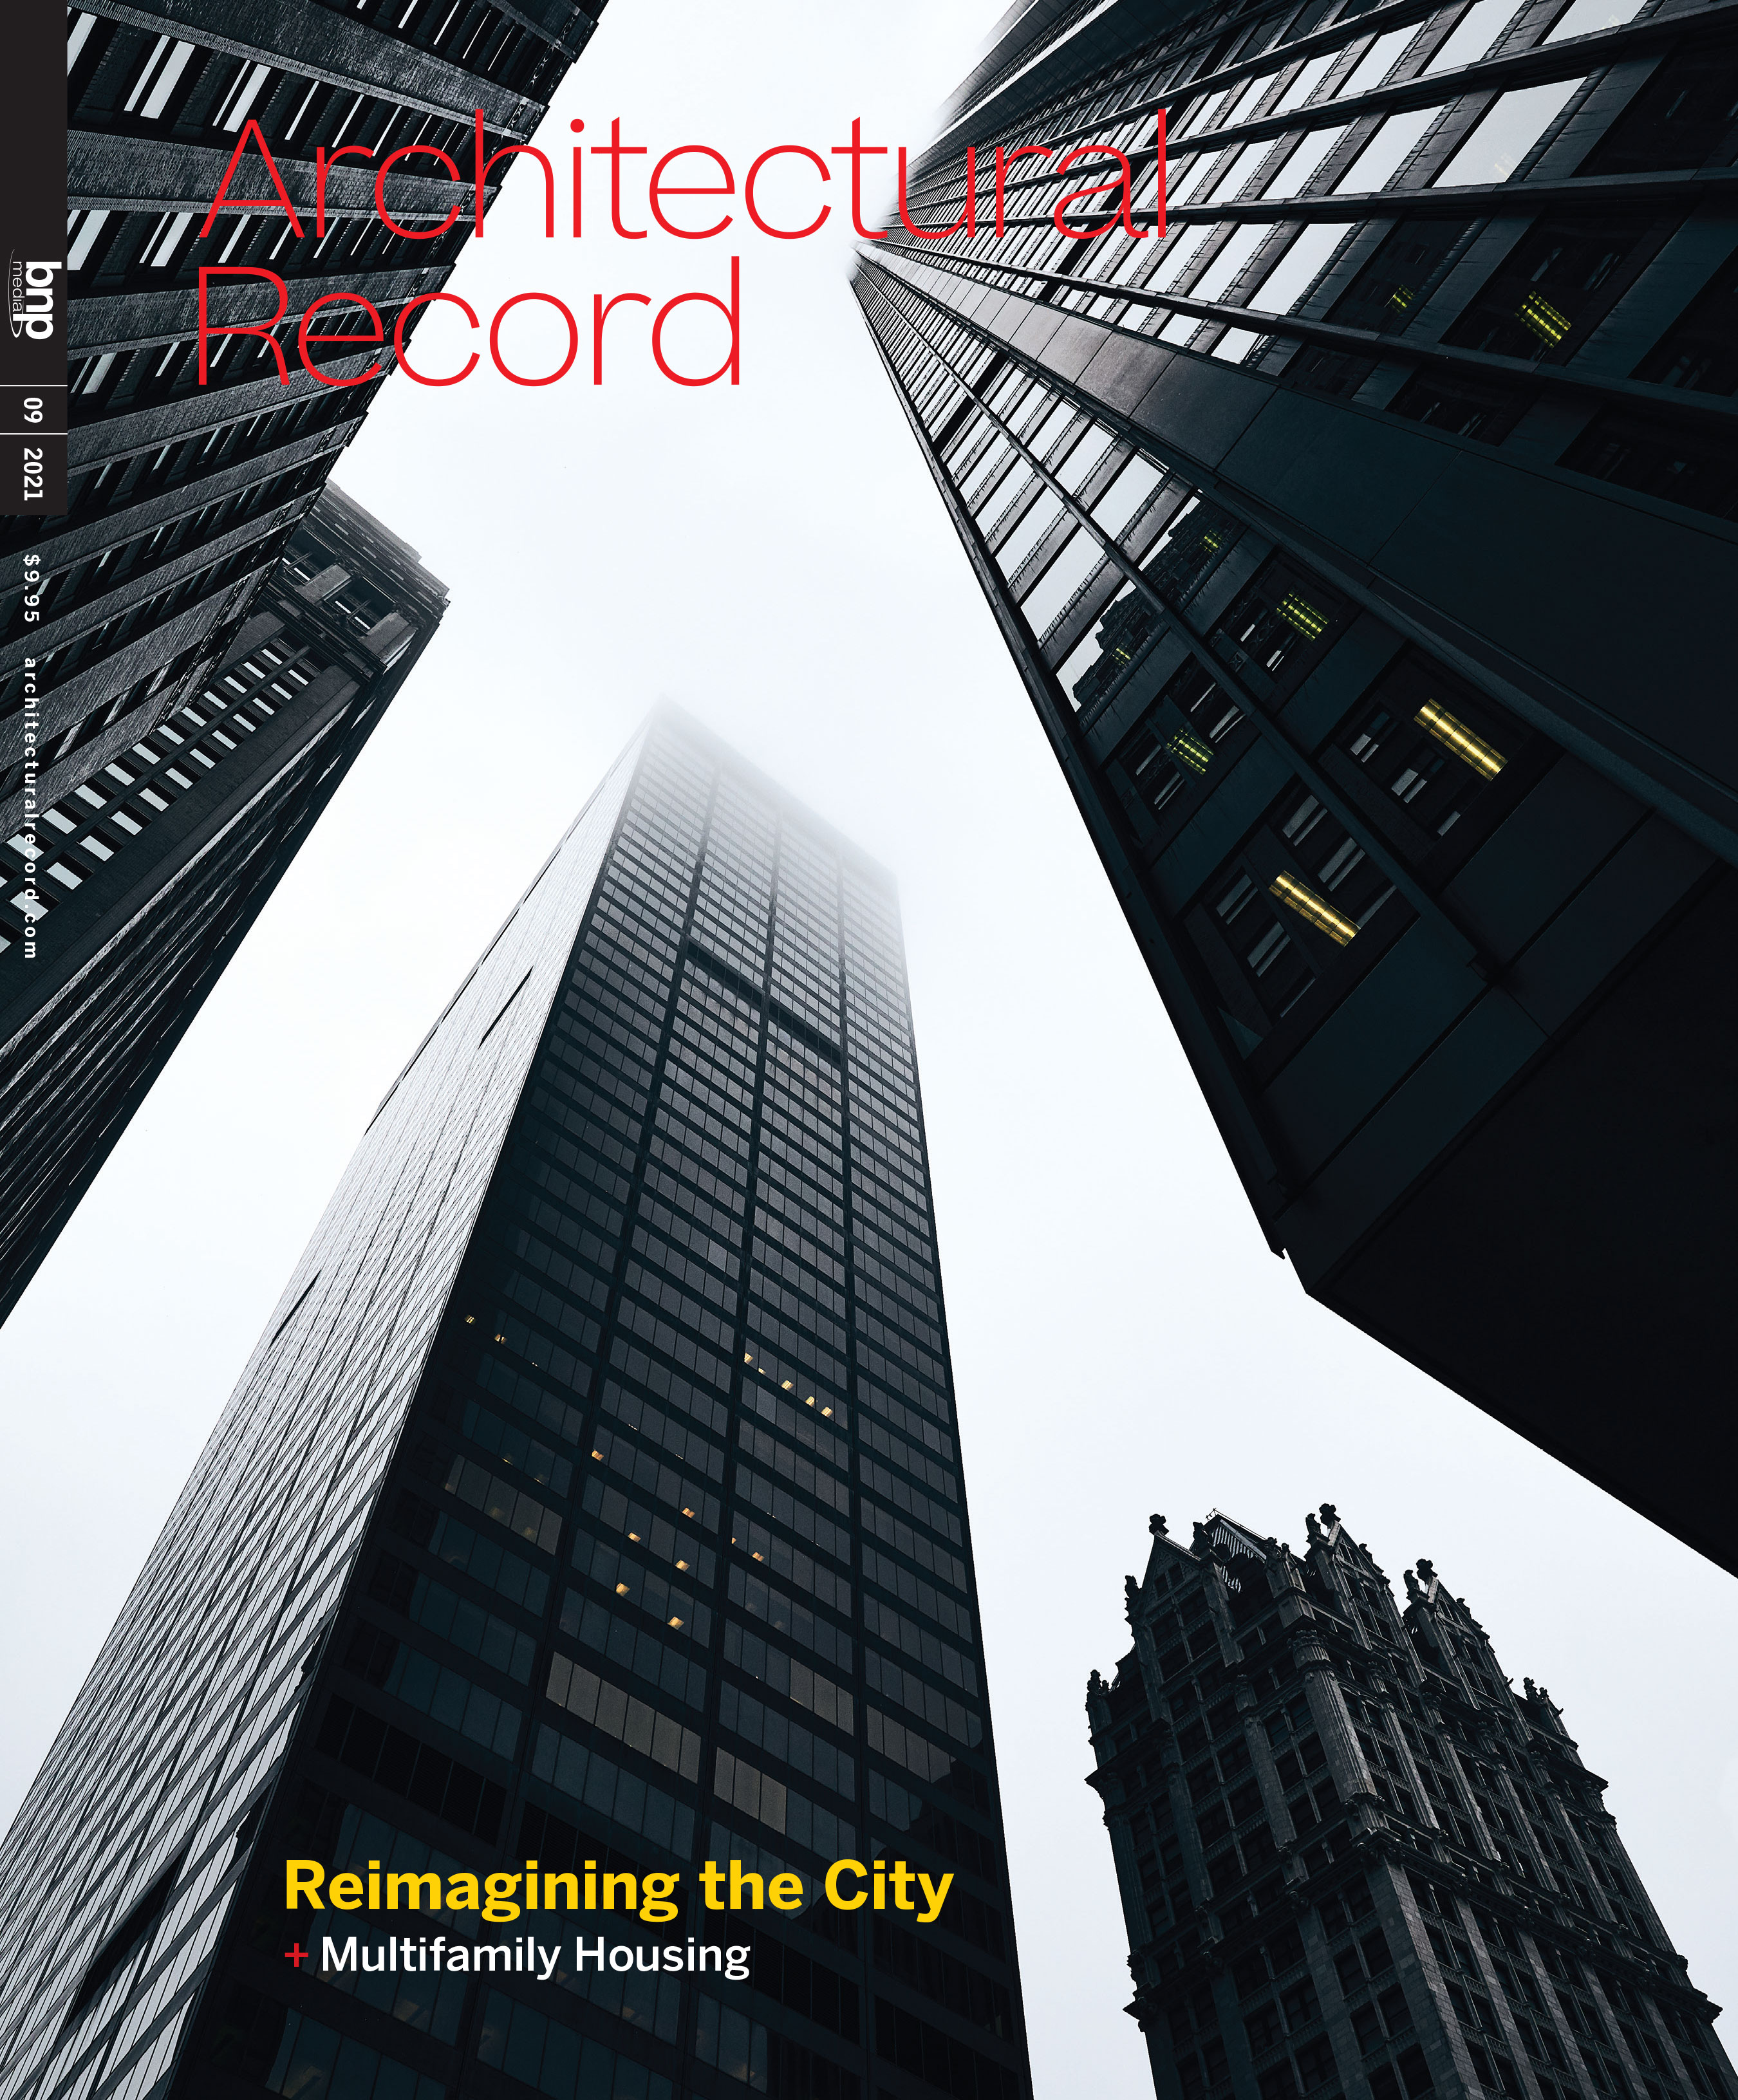 Architectural Record - "Reimagining the City," September 2021